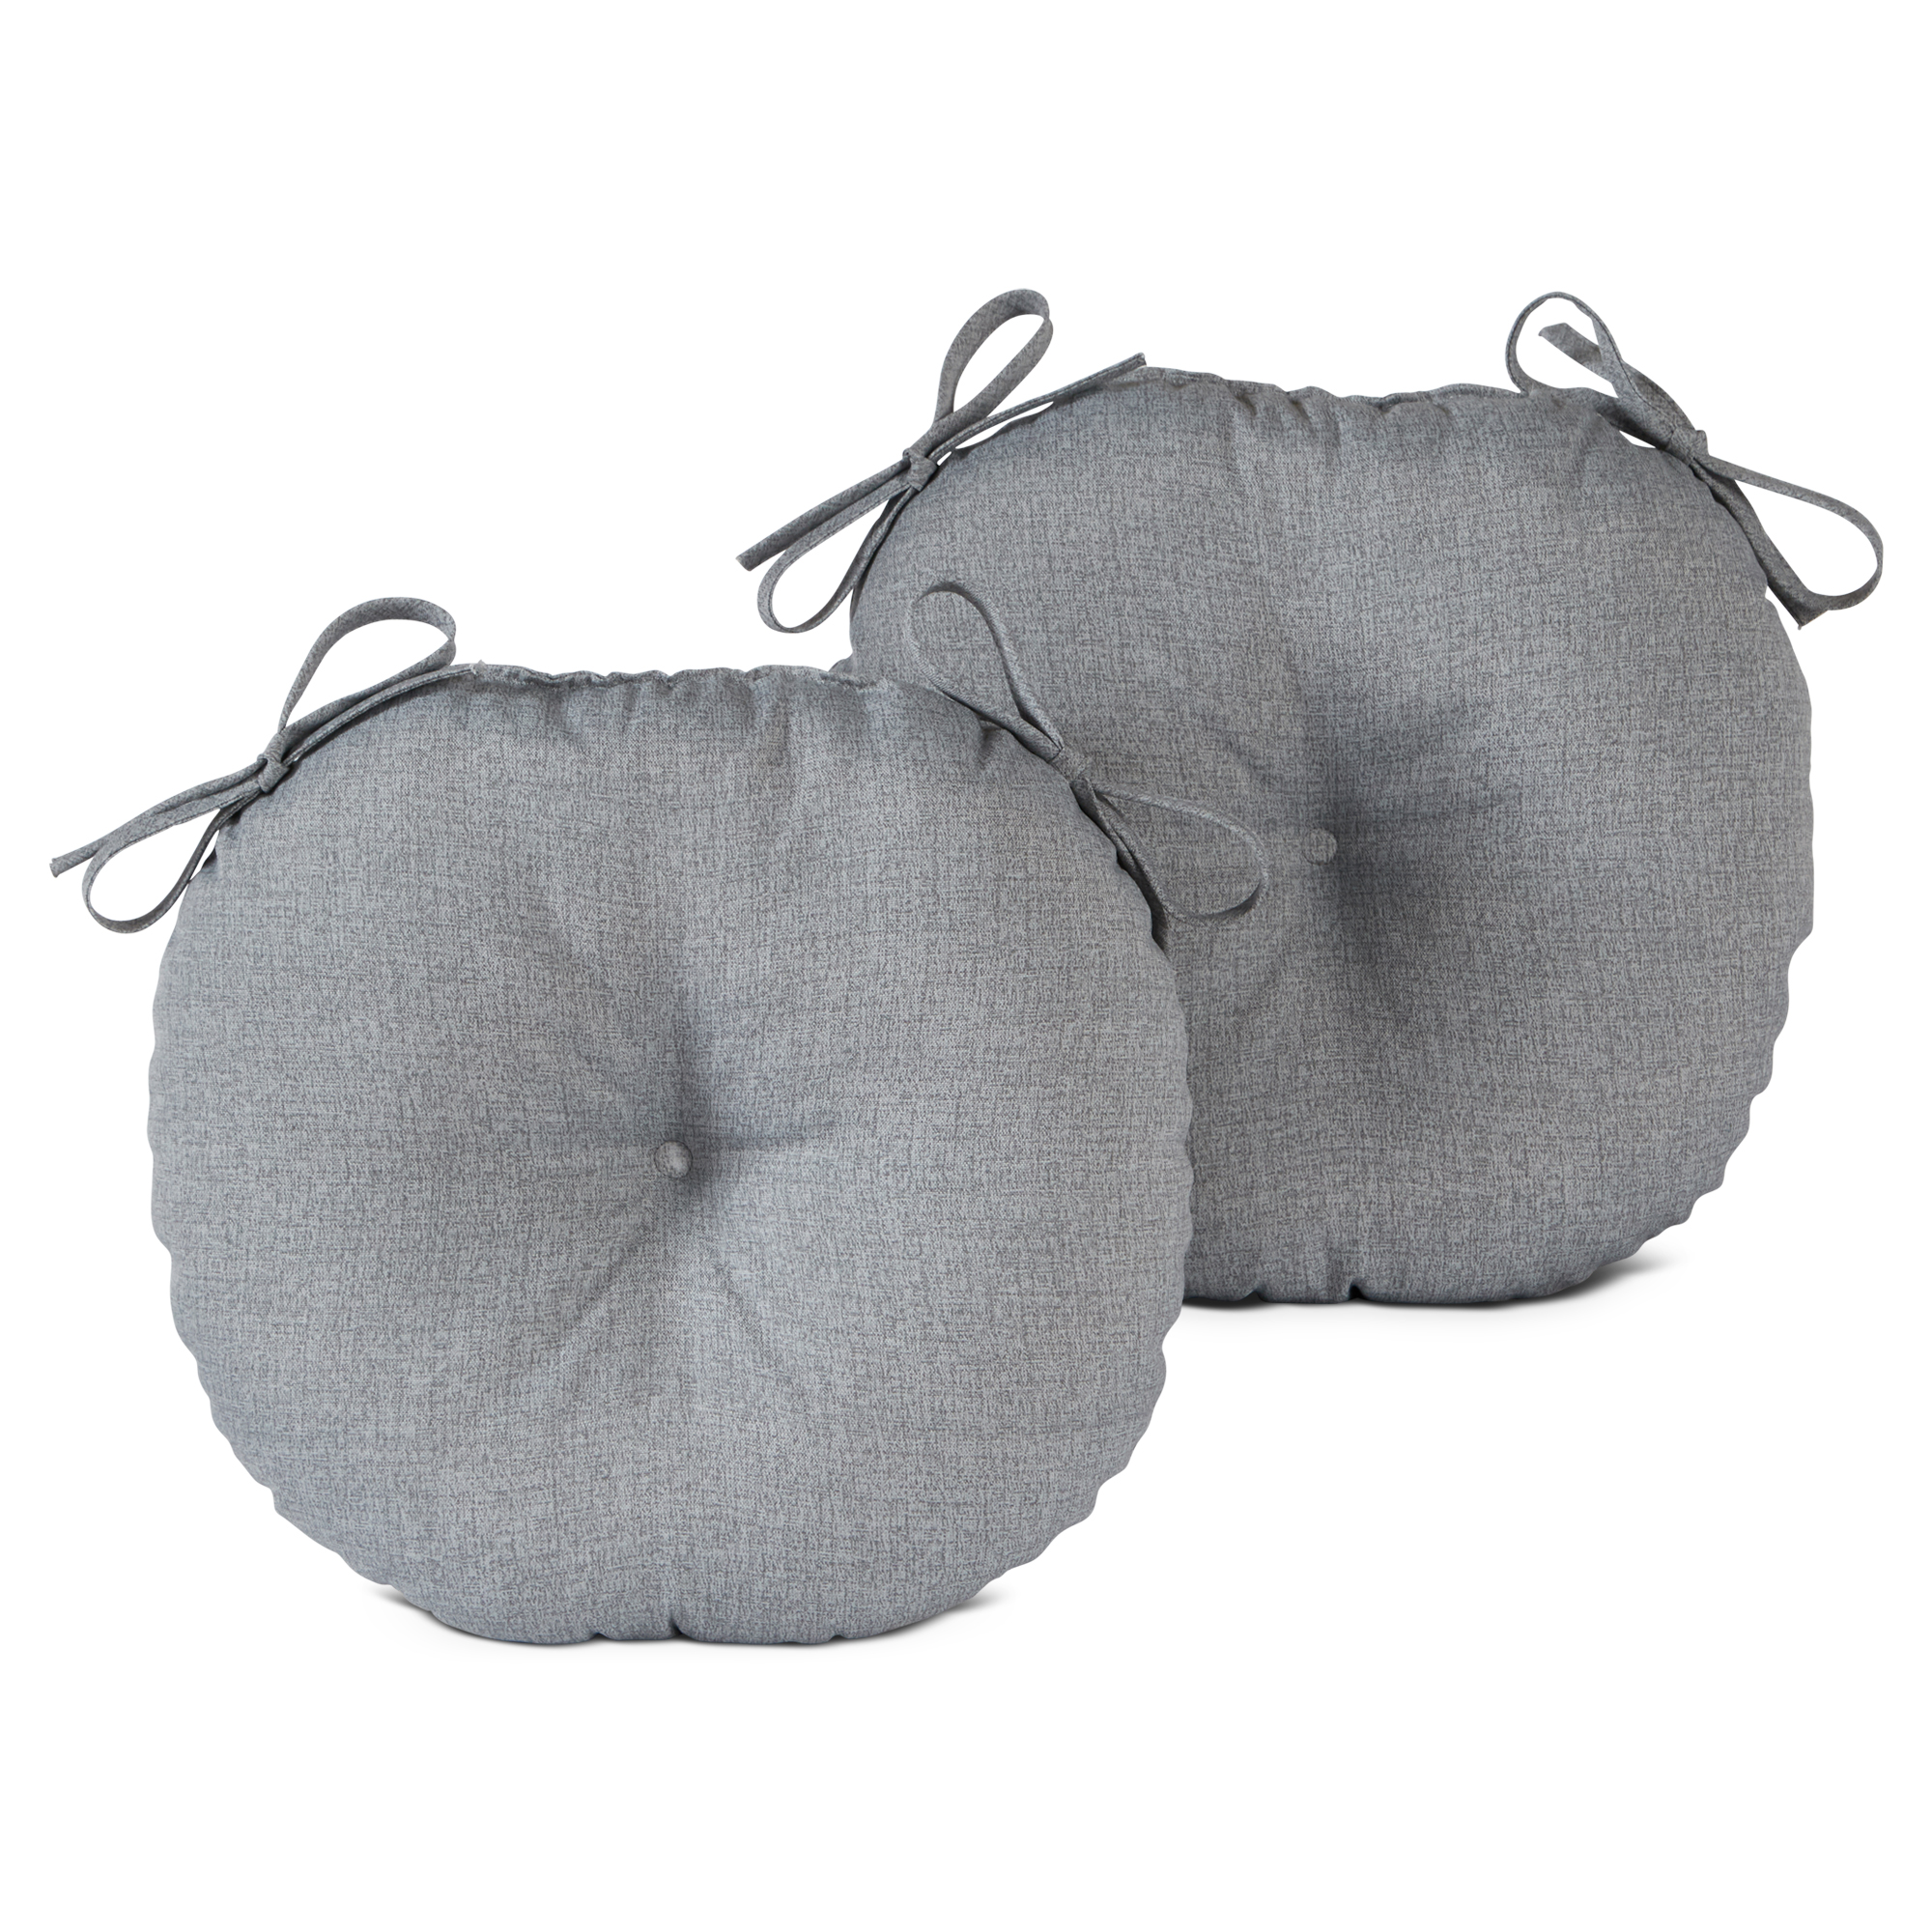 Greendale Home Fashions Heather Gray 15 in. Round Outdoor Reversible Bistro Seat Cushion (Set of 2) - image 1 of 7